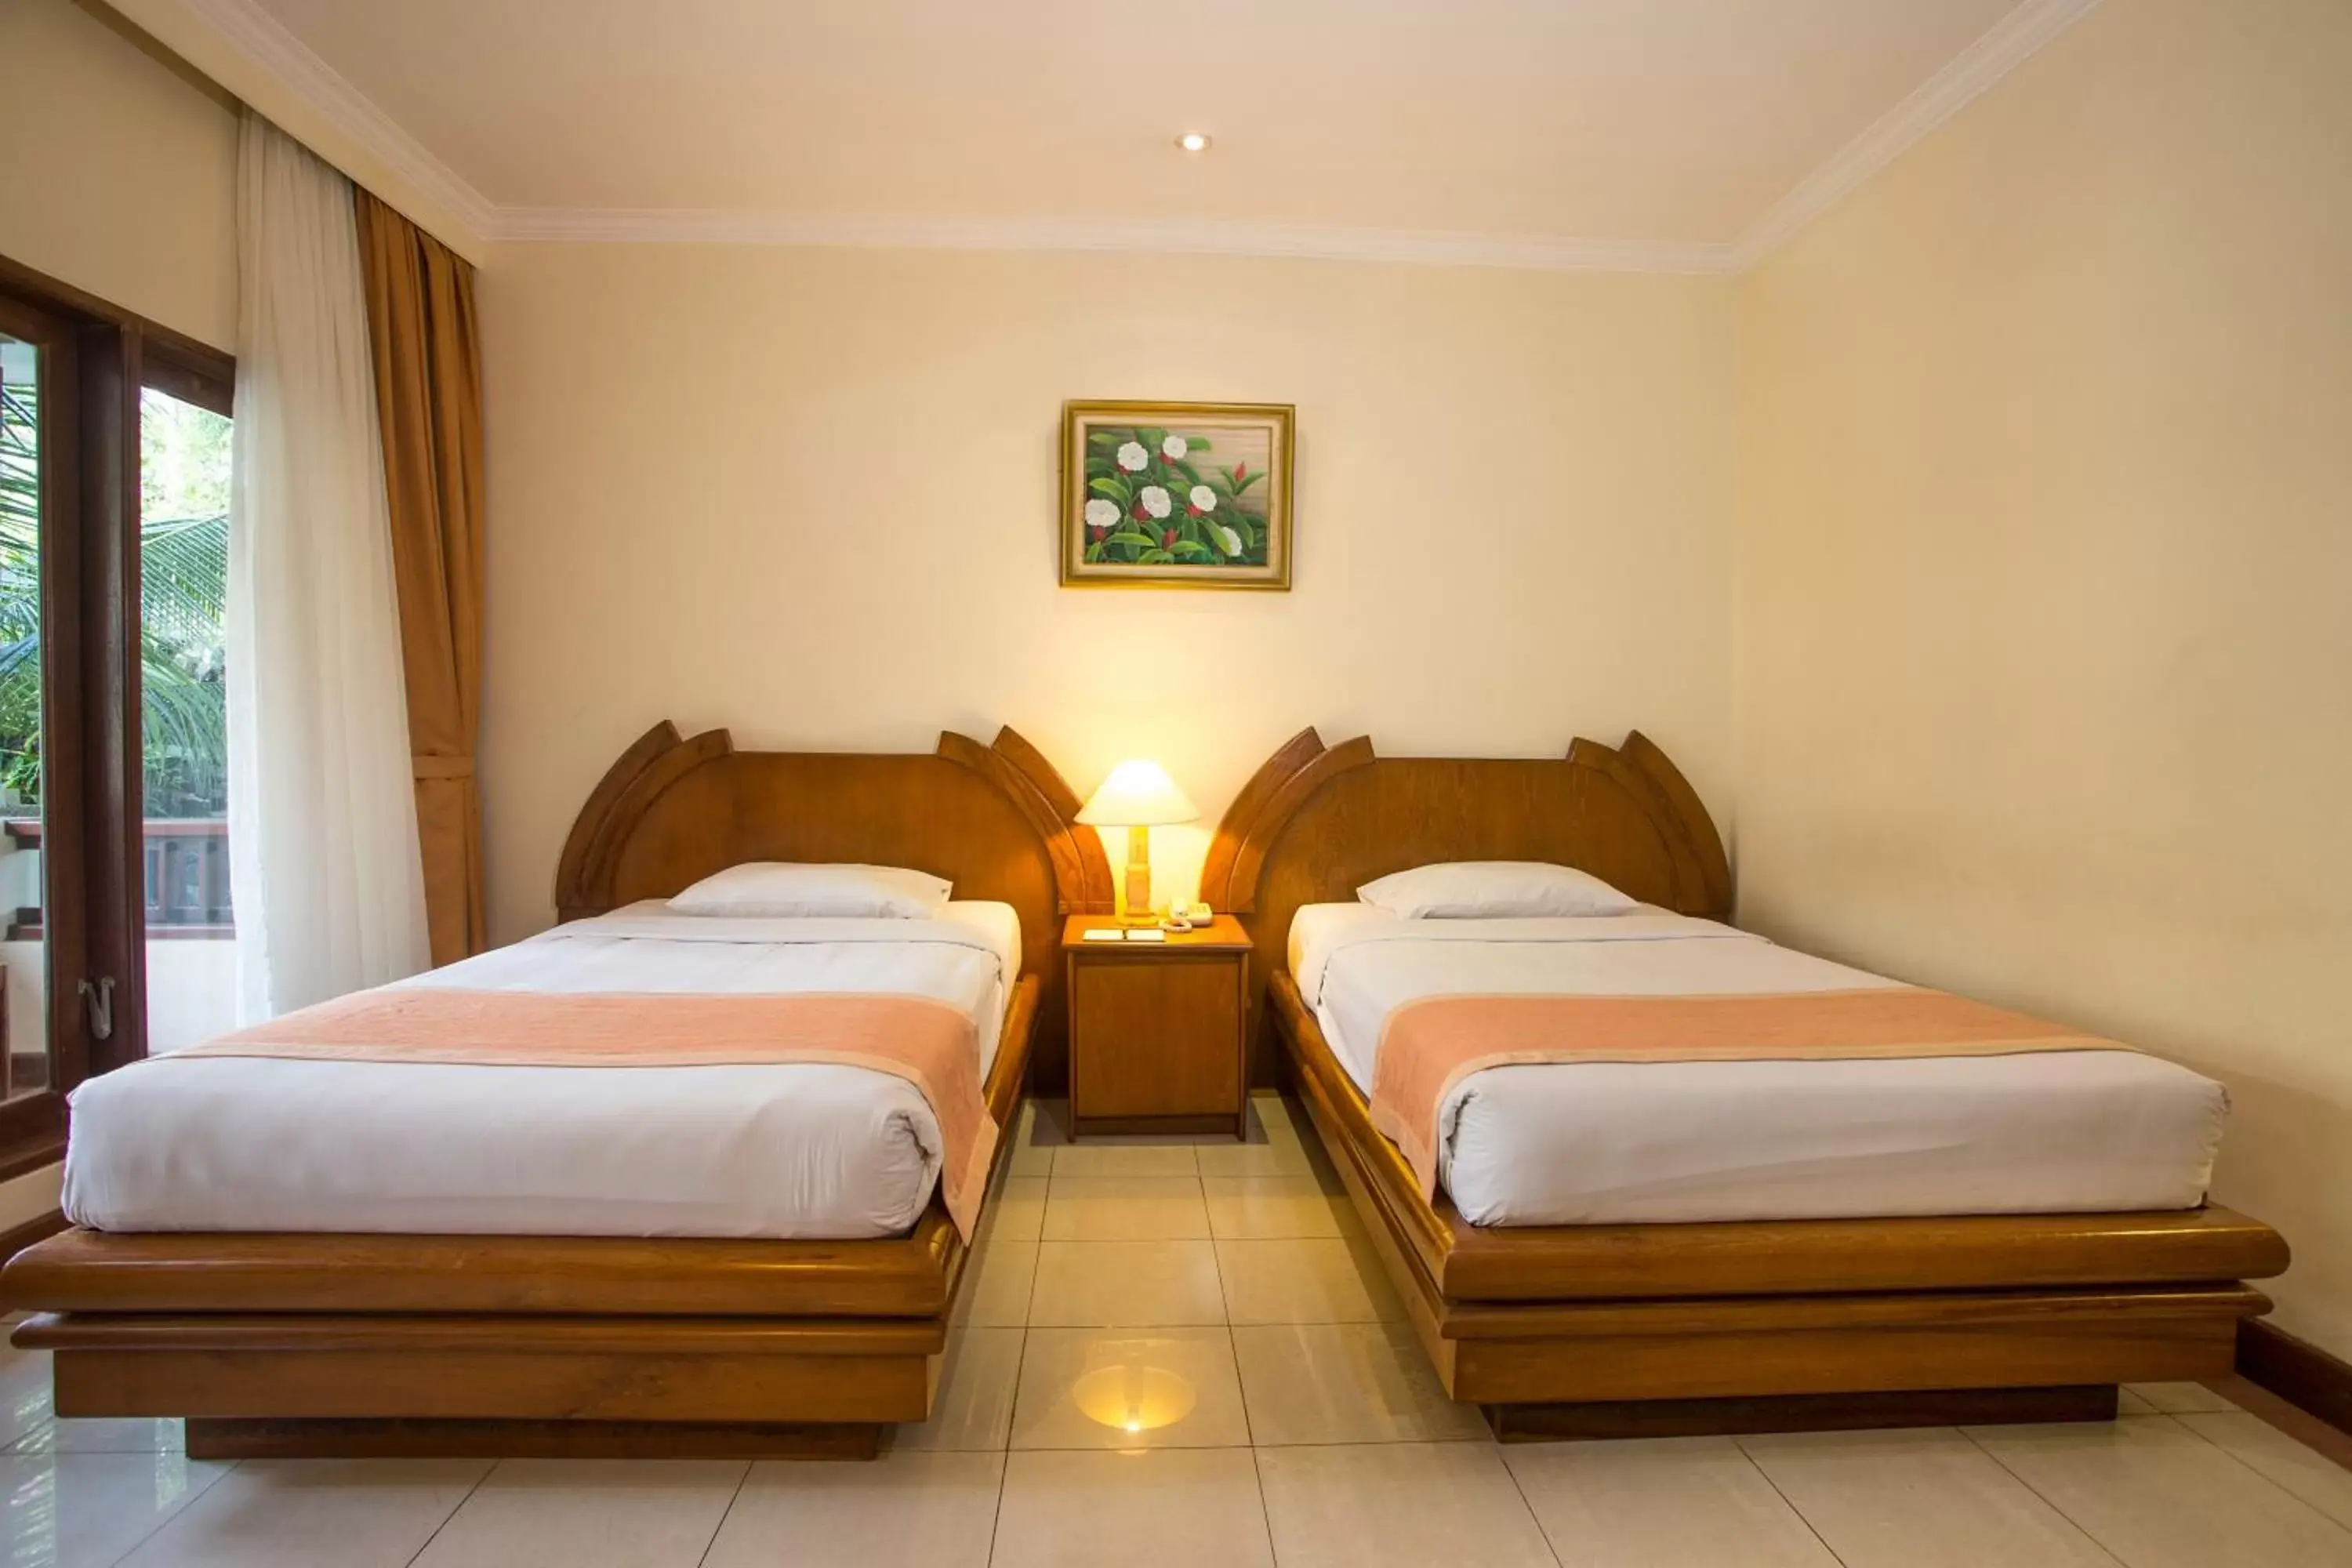 Bed, Room Photo in Parigata Resorts and Spa